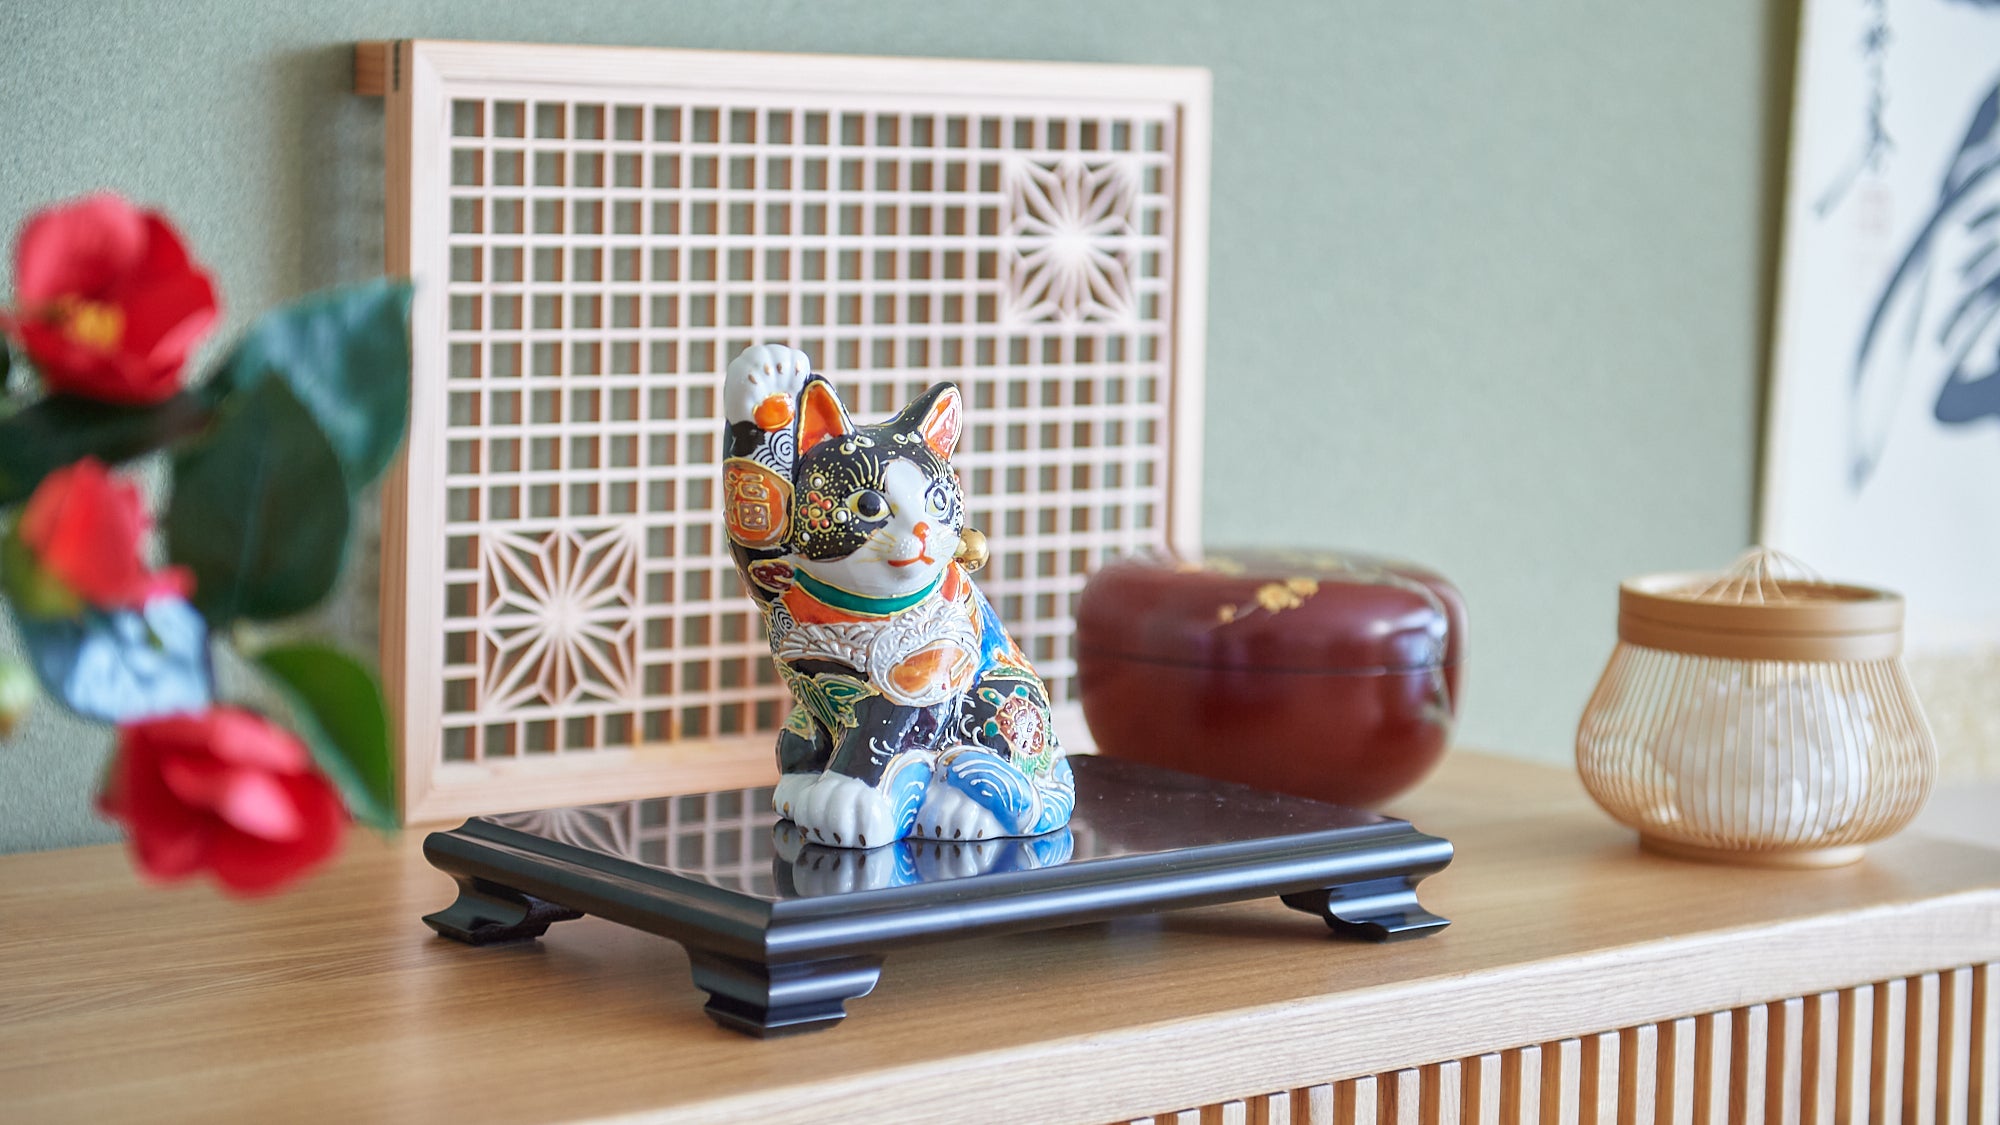 5 Aesthetic Gifts For Interior Design Enthusiasts - MUSUBI KILN